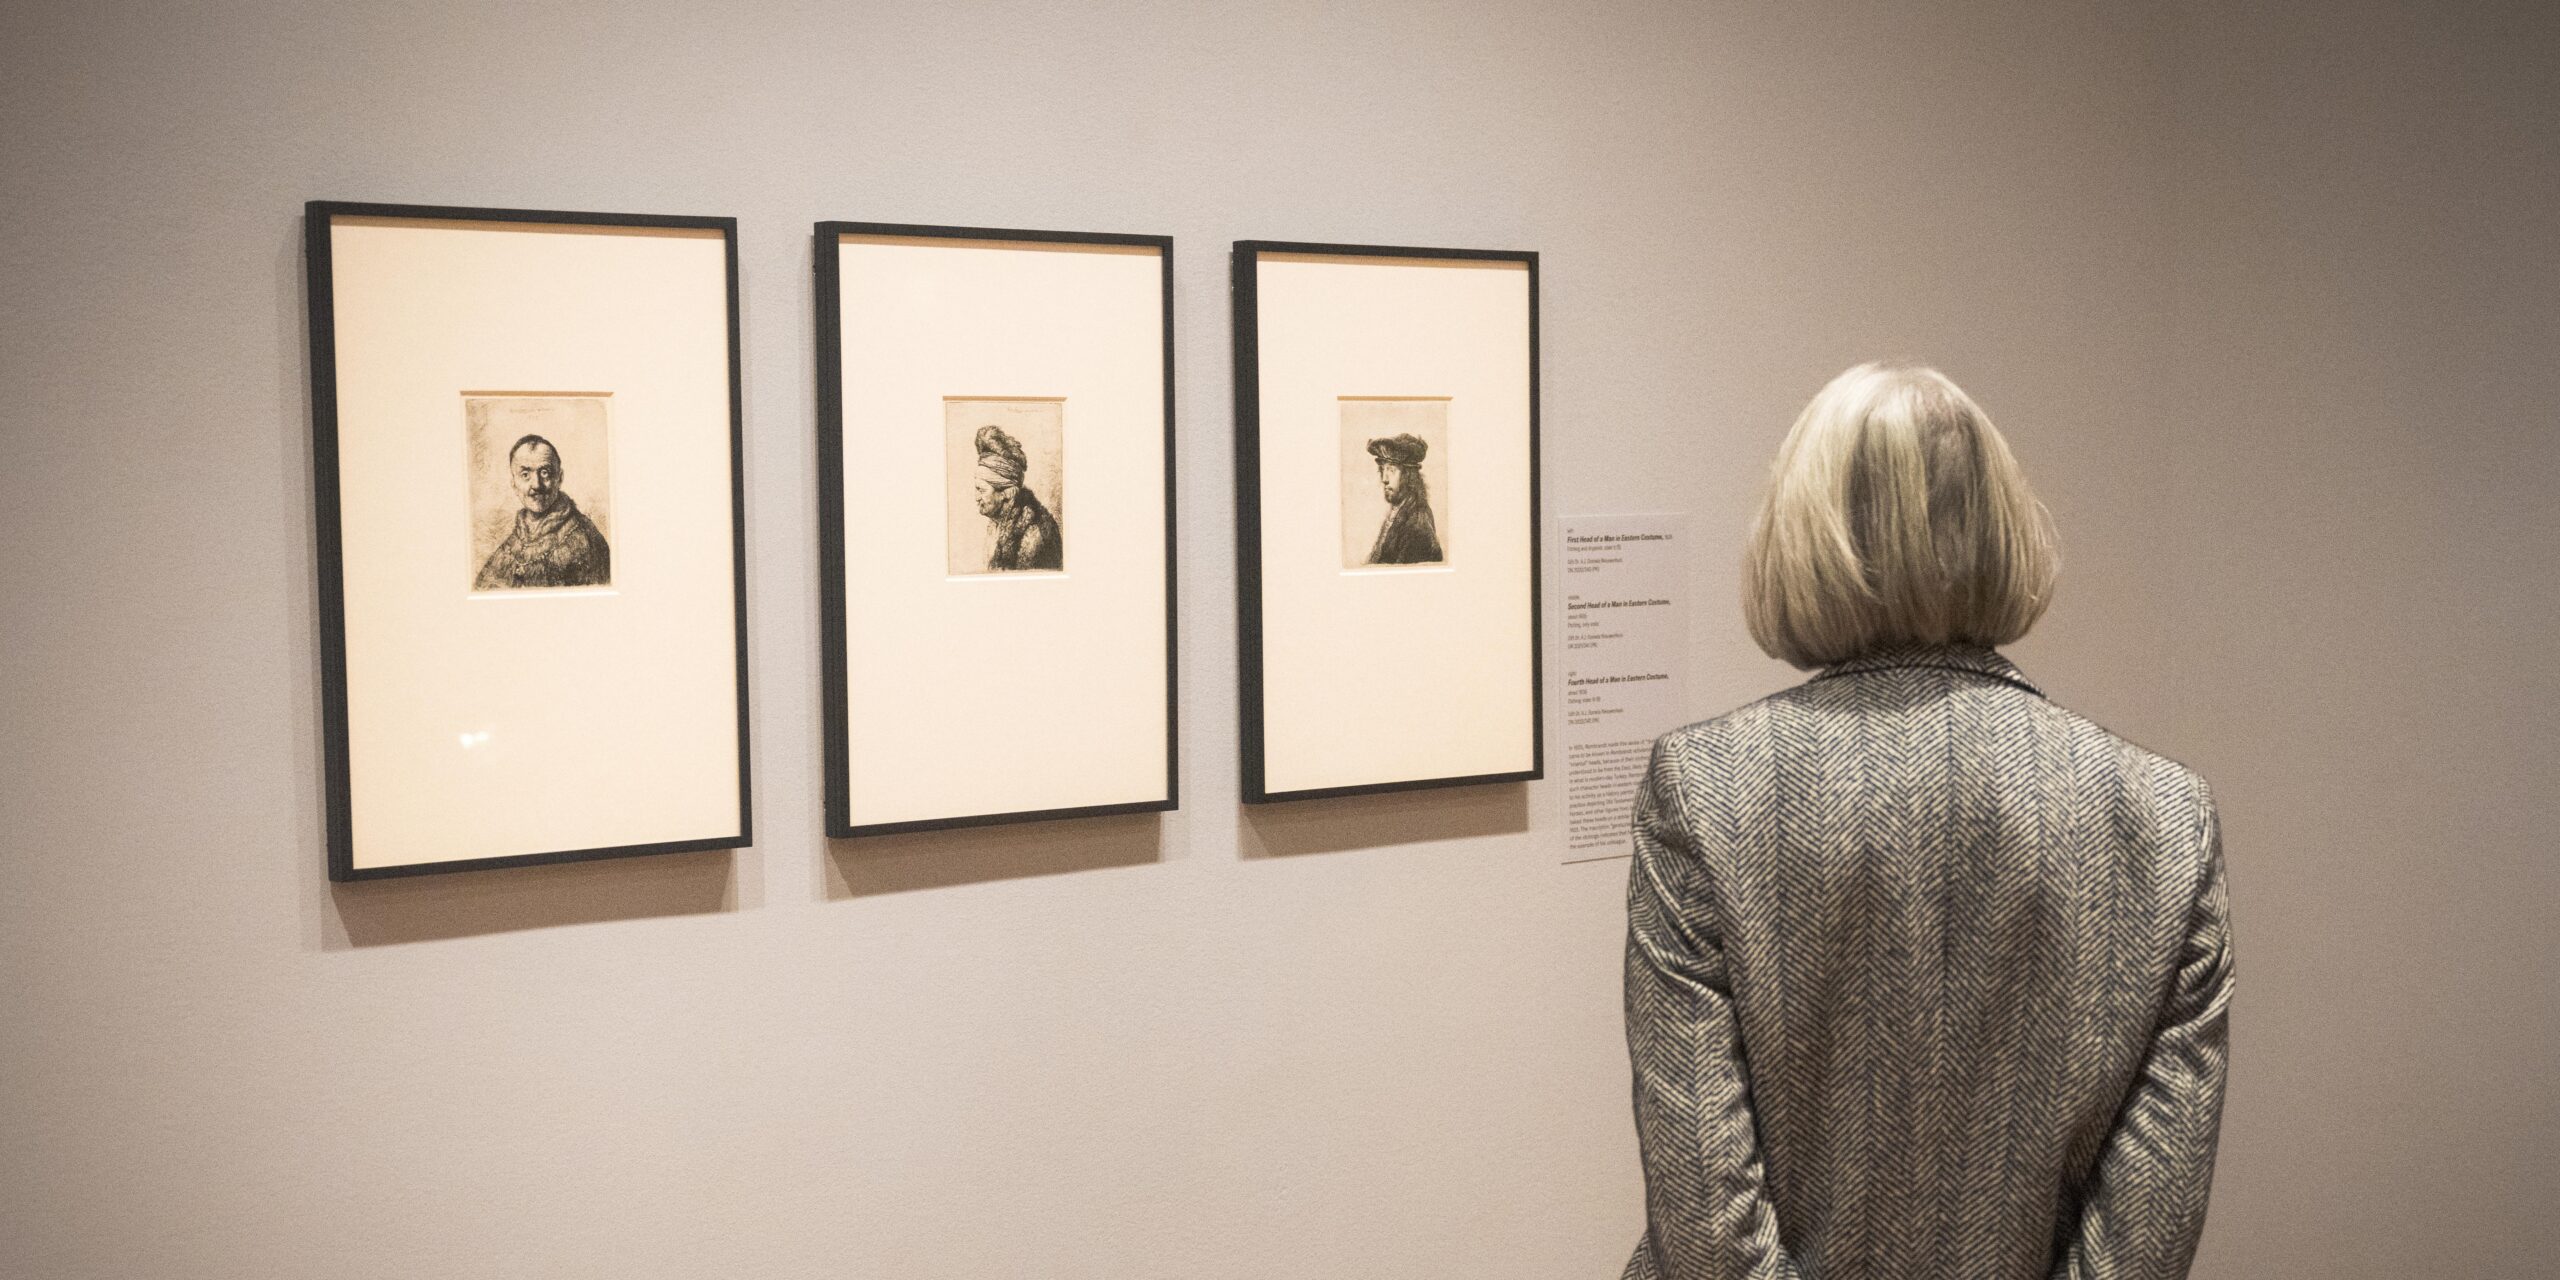 A guest viewing three works in the 'Rembrandt' exhibition